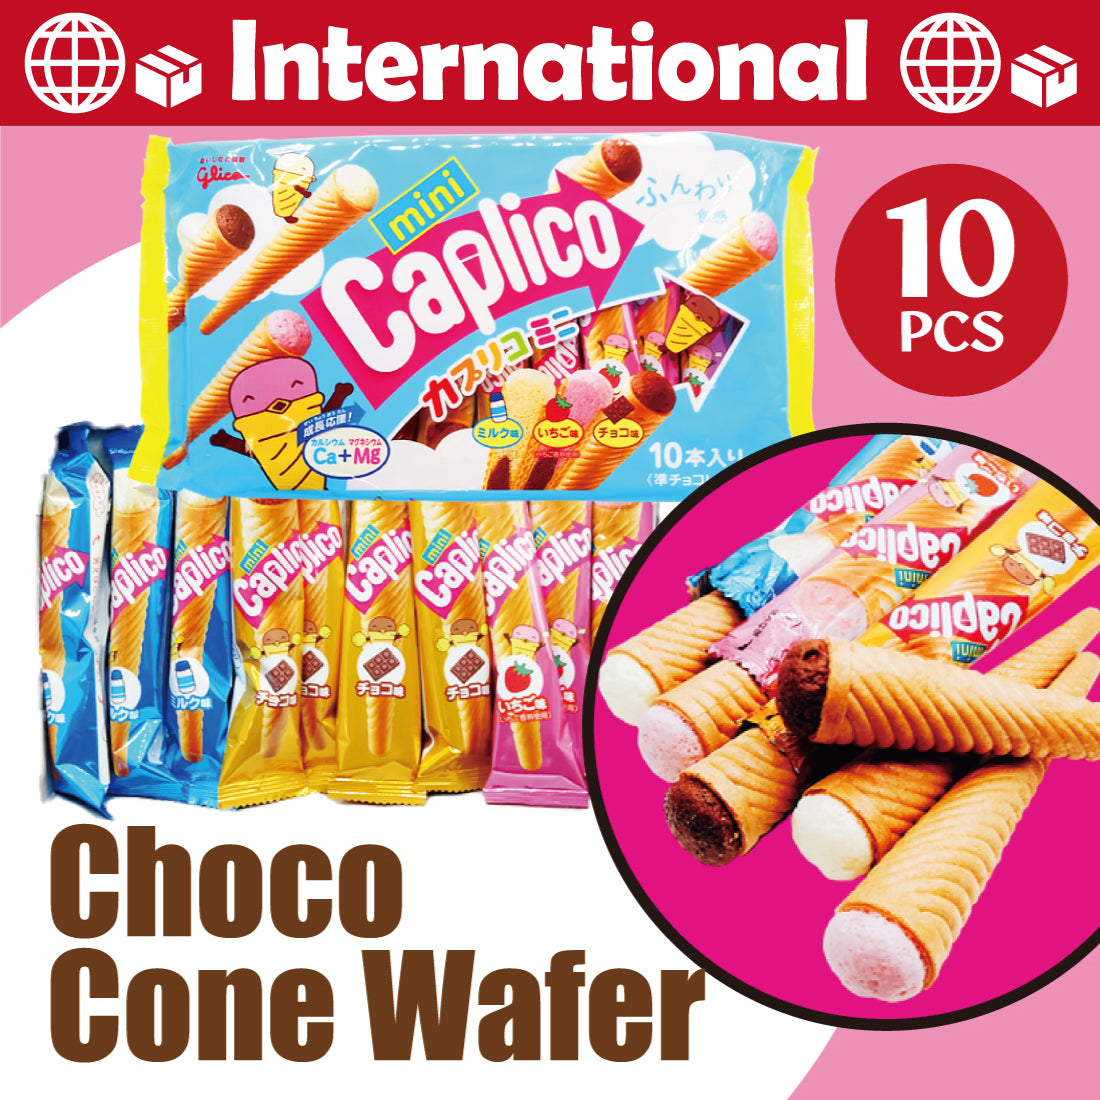 [Shipping] Assorted Chocolate Cone Wafer